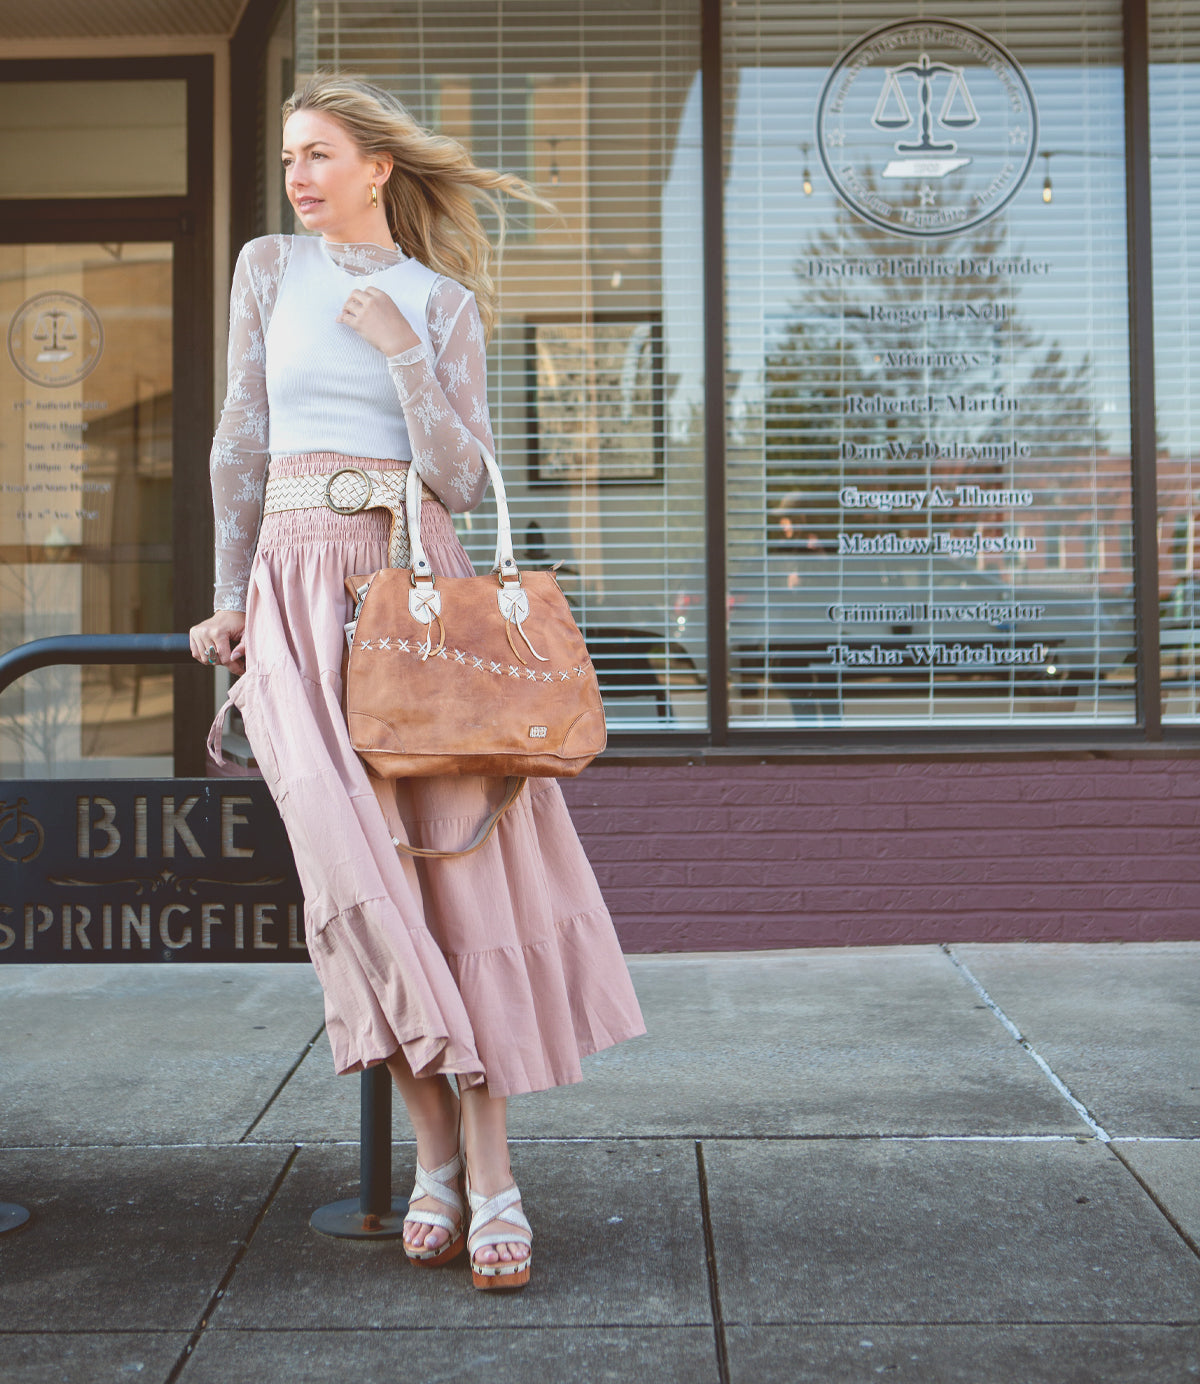 A woman in a flowing pink dress and white lace cardigan stands outside a shop, holding a large brown leather bag from Bed|Stü's 'Complete Your Look with Our 'Shop the Look' Bundle!'.